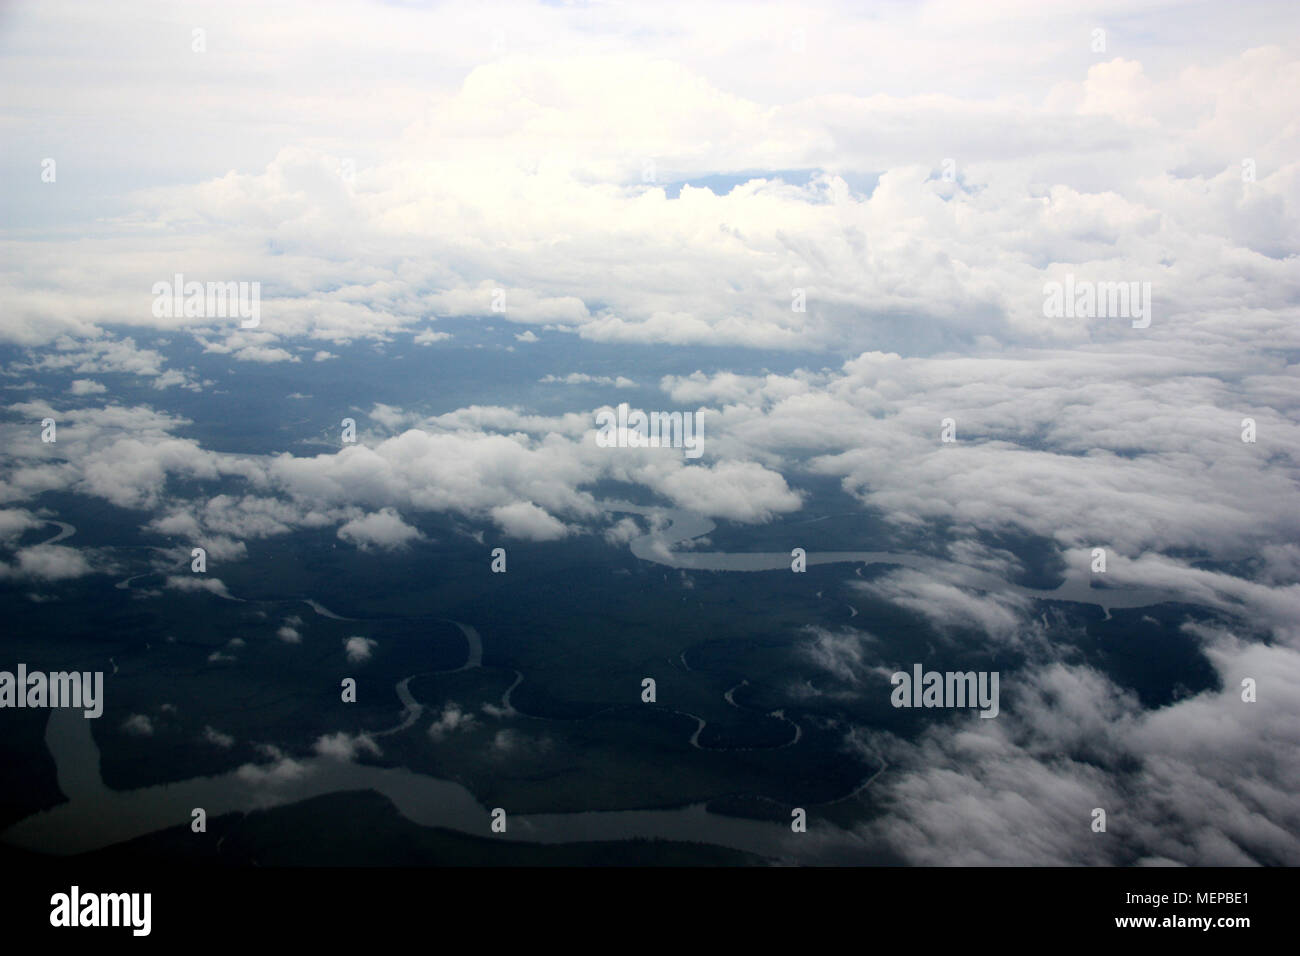 Aerial View of Mount Cameroon covered by Clouds, near Douala, Cameroon Stock Photo